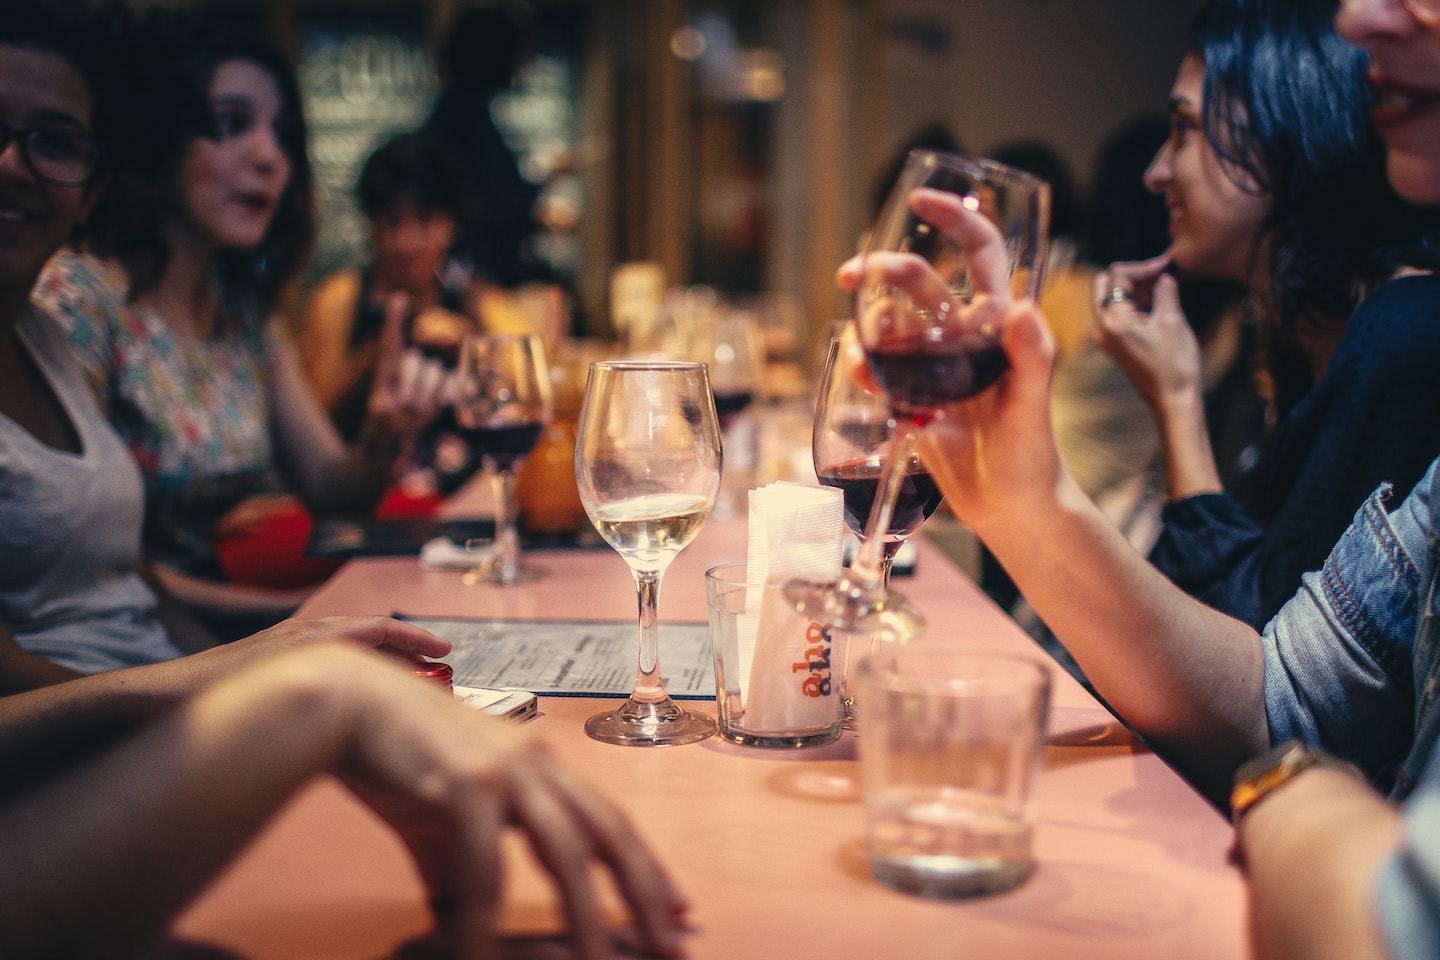 people drinking wine and talking around a restaurant table